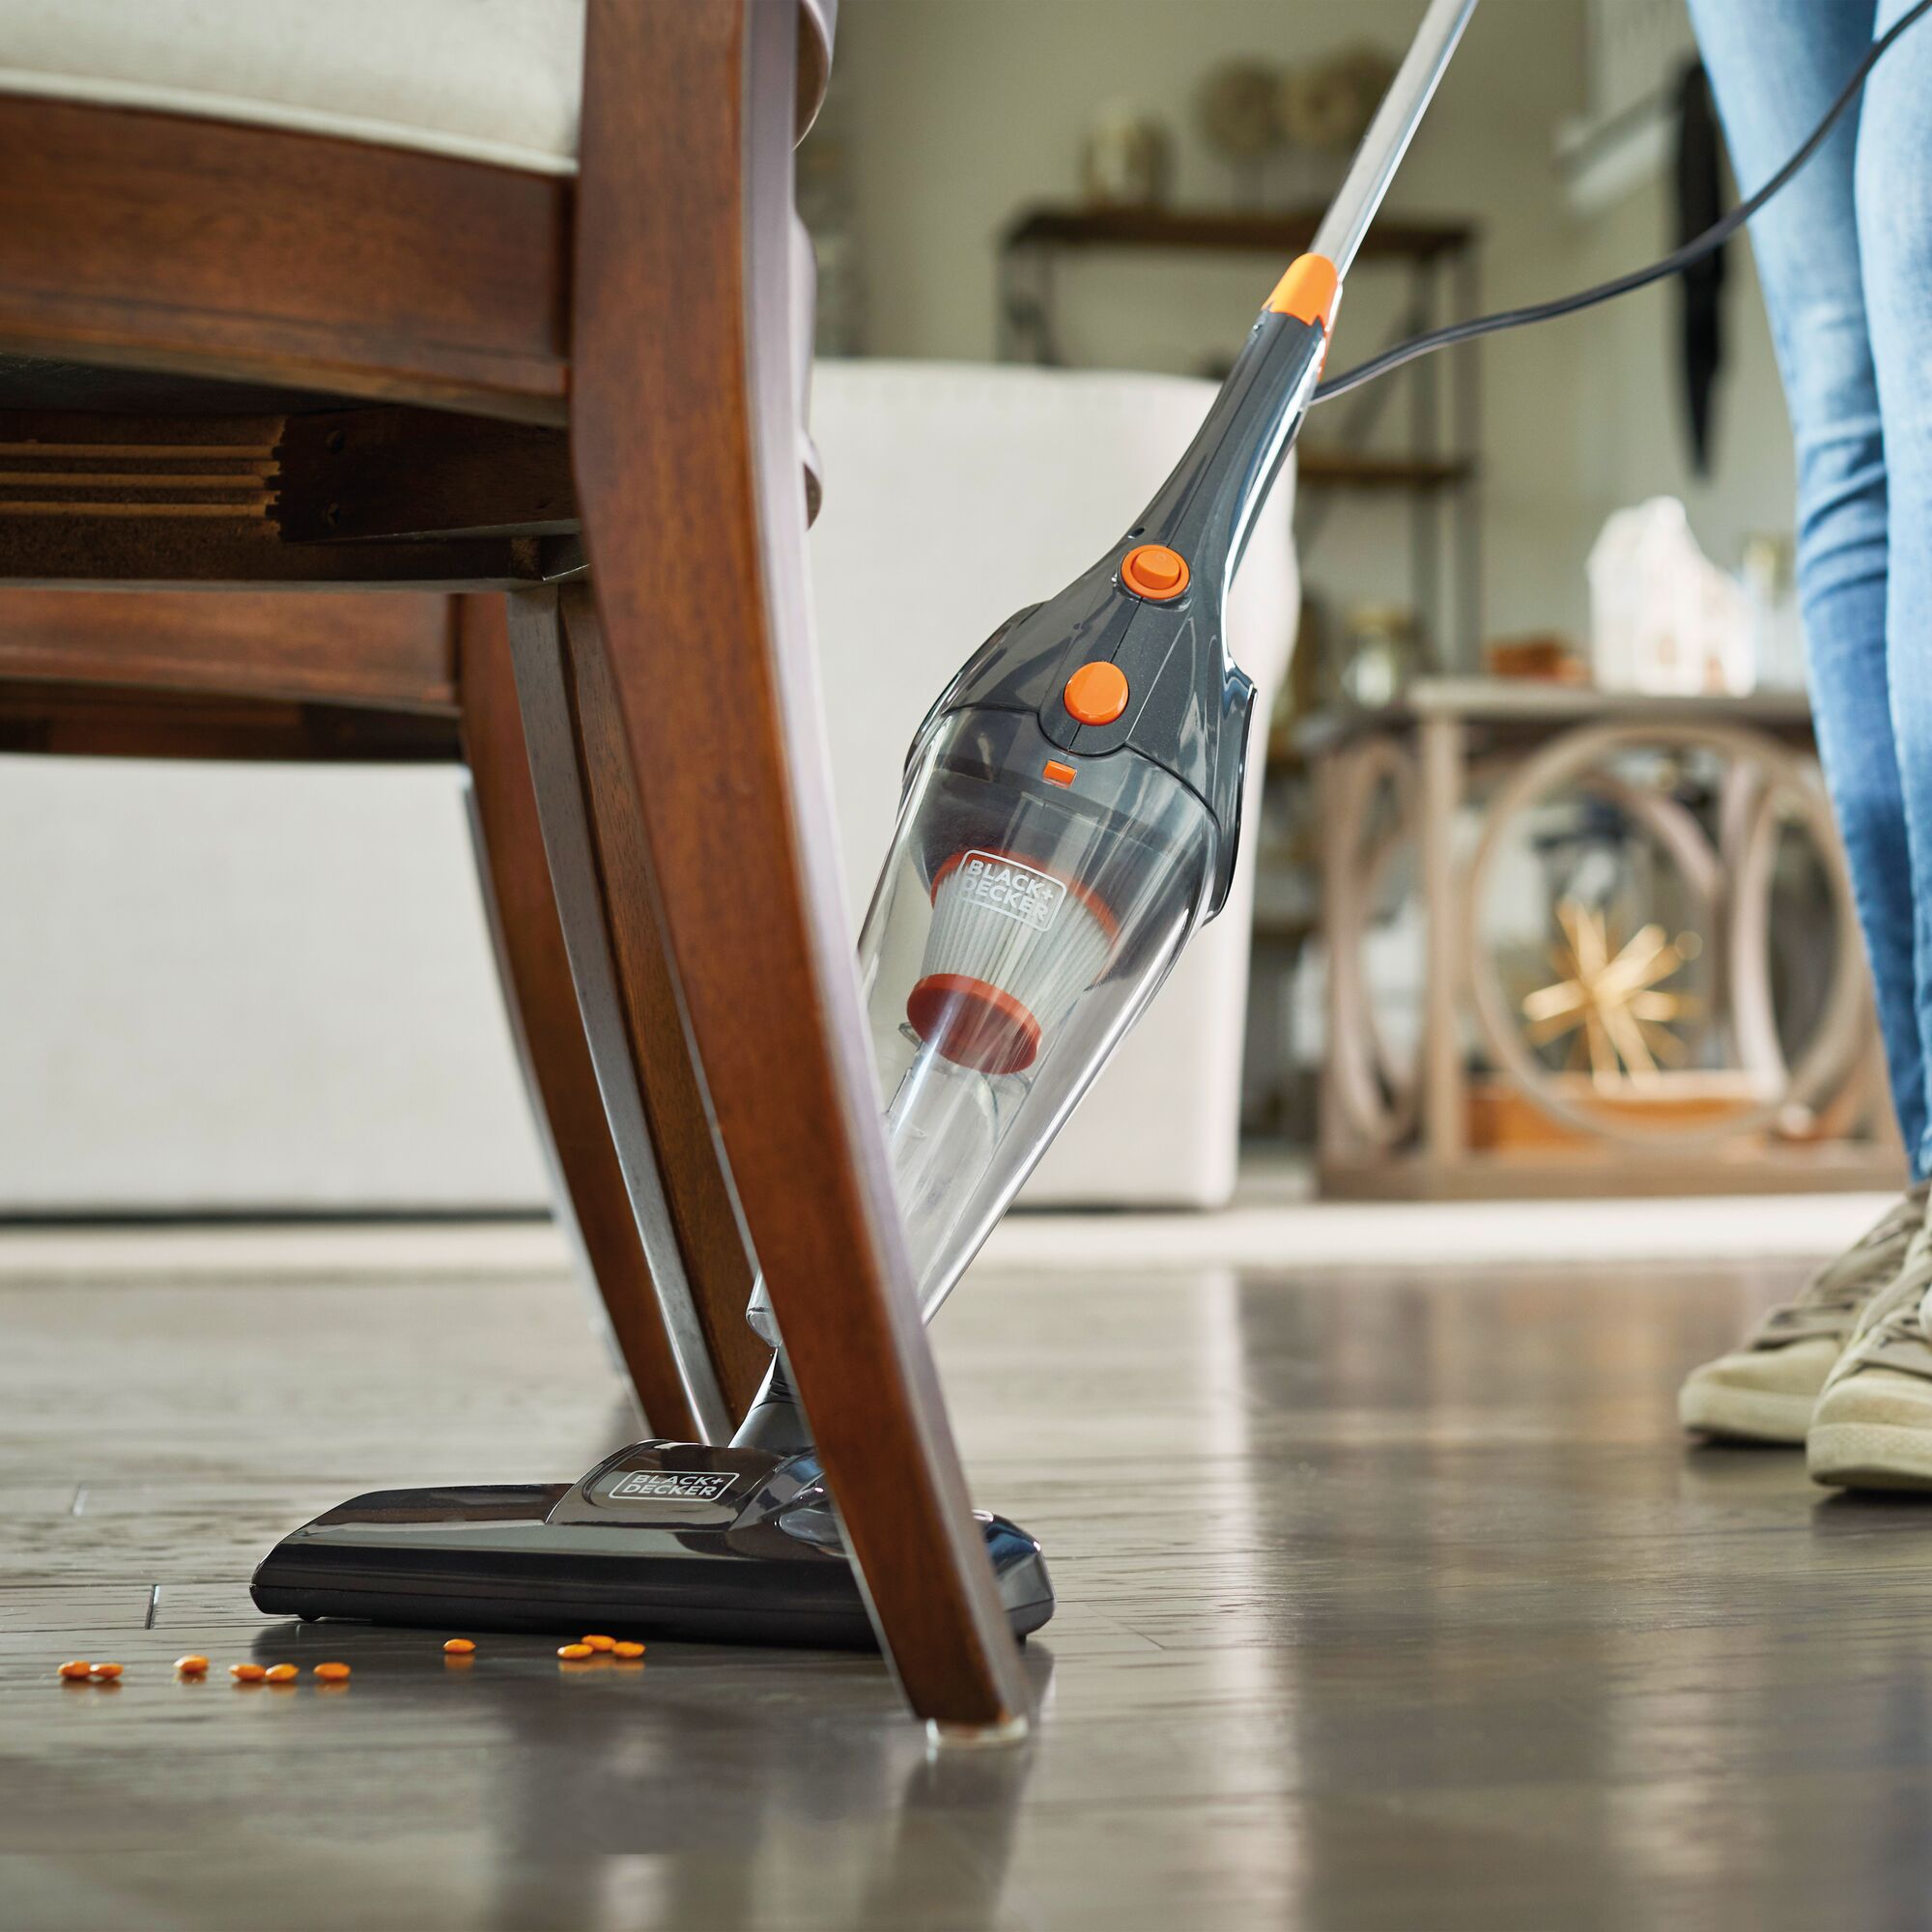 Close-up of 3In1 Upright Stick Vacuum Cleaner vacuuming under kitchen chairs.